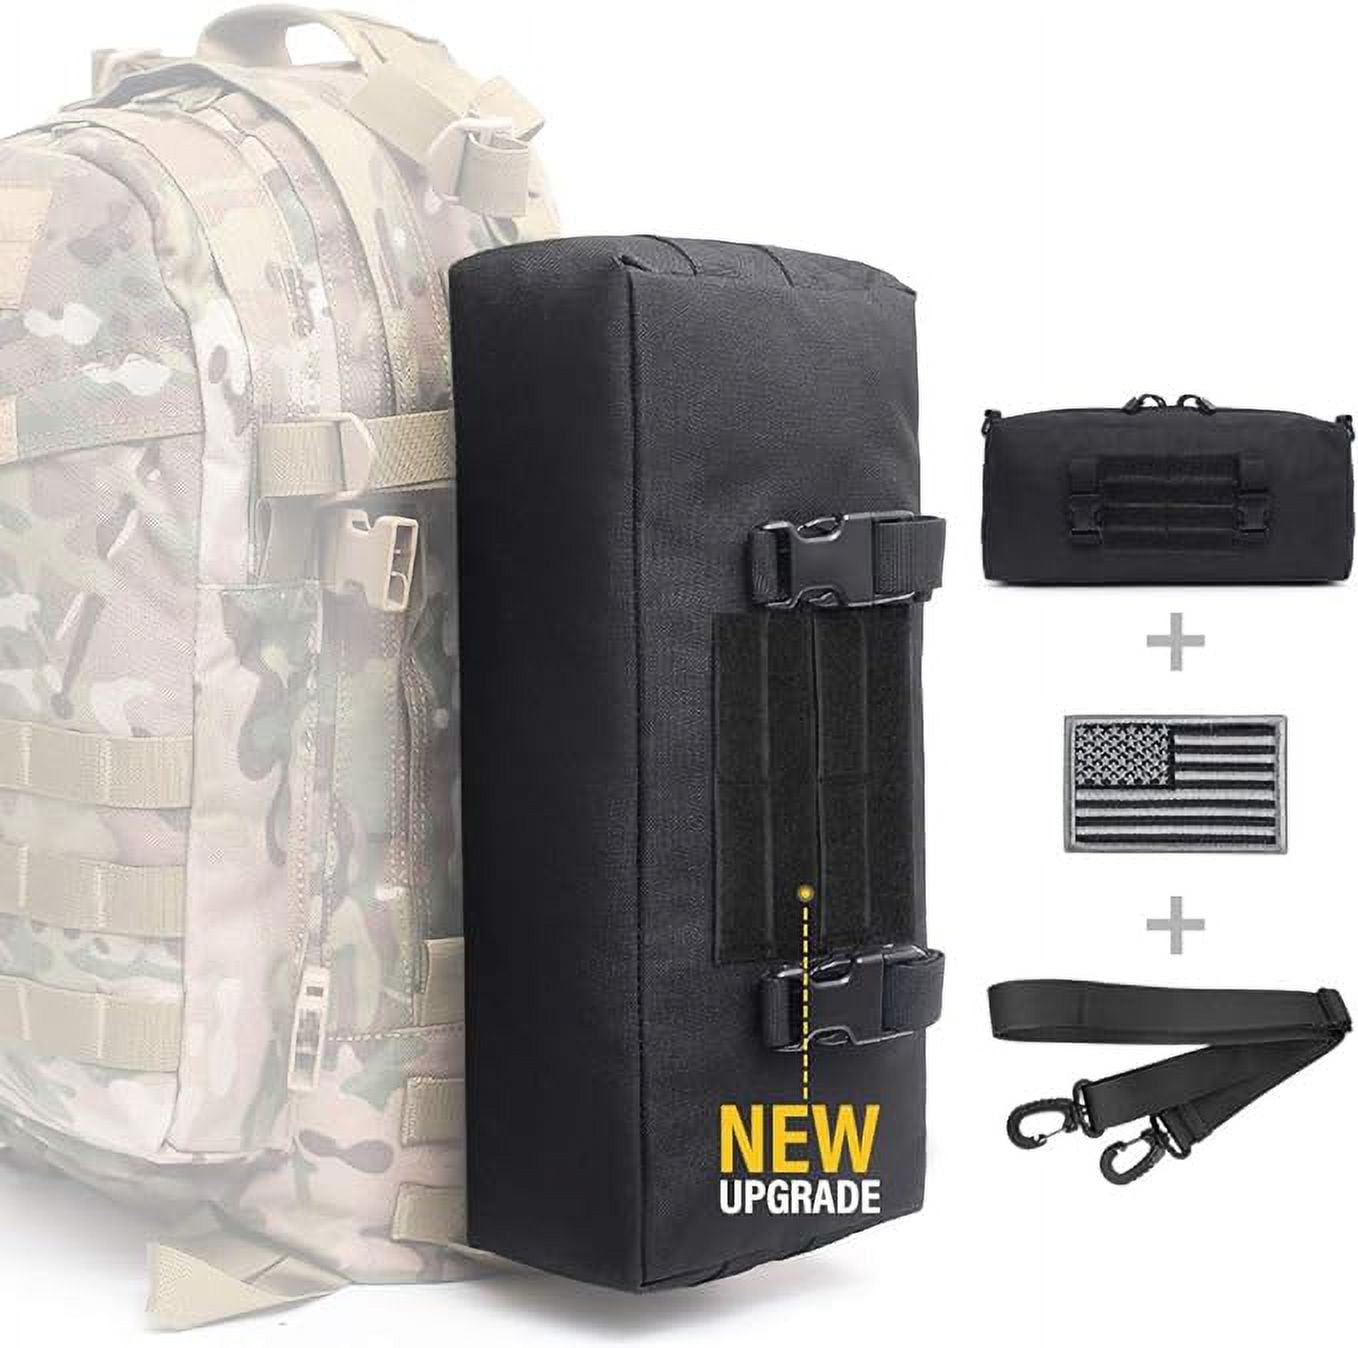 WYNEX Tactical Increment Molle Pouch, Vertical EDC Utility Pouches Sling Bag  Military Multi-Purpose Large Capacity with Shoulder Strap Modular Design 